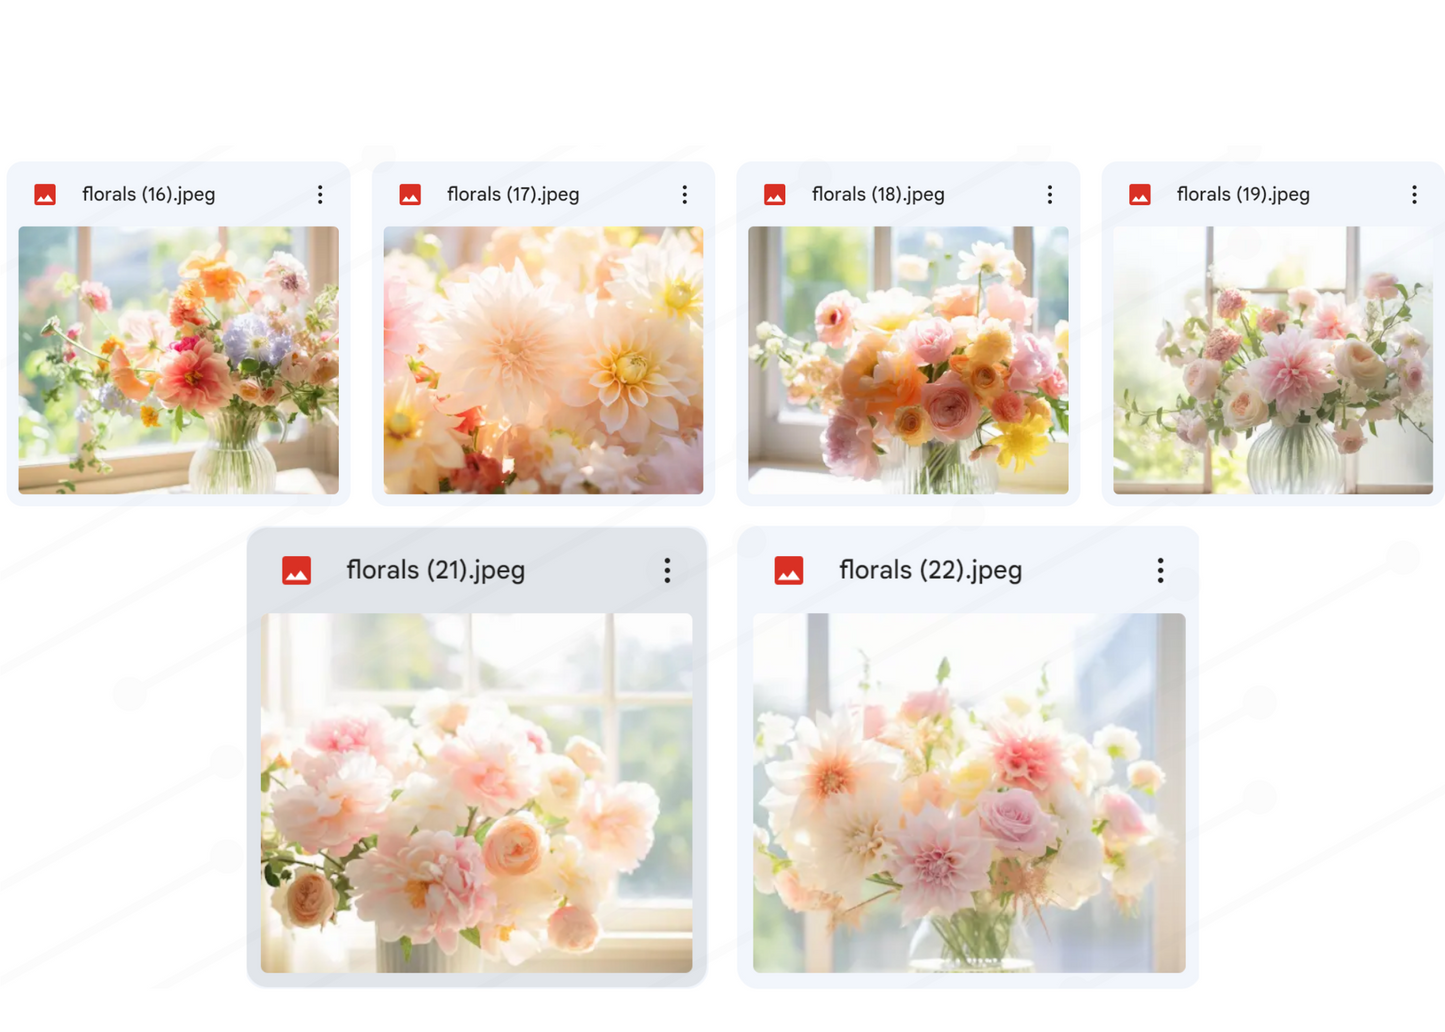 Floral Stock Photo Bundle - 22 Pastel Florals Photos- Specialty Stock Photos PLR (For Your Use Only )